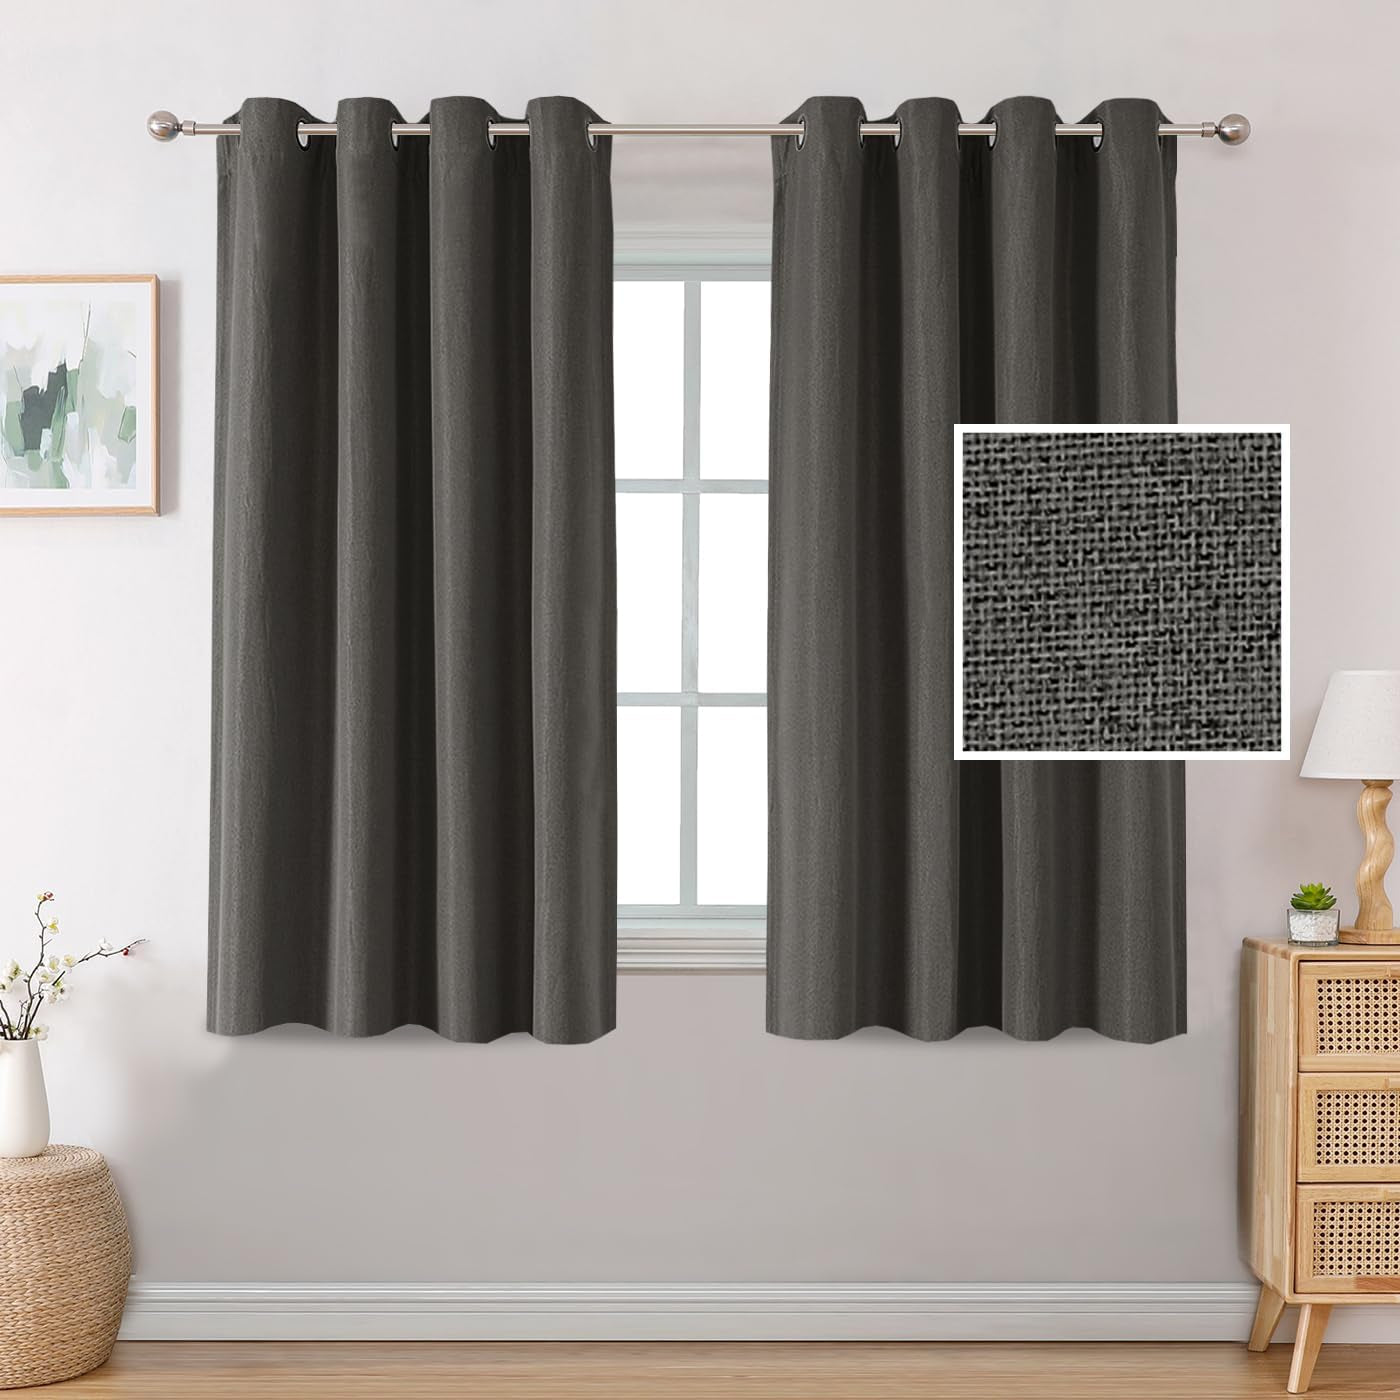 H.VERSAILTEX Linen Blackout Curtains 84 Inches Long Thermal Insulated Room Darkening Linen Curtains for Bedroom Textured Burlap Grommet Window Curtains for Living Room, Bluestone and Taupe, 2 Panels  H.VERSAILTEX Charcoal Gray 52"W X 45"L 